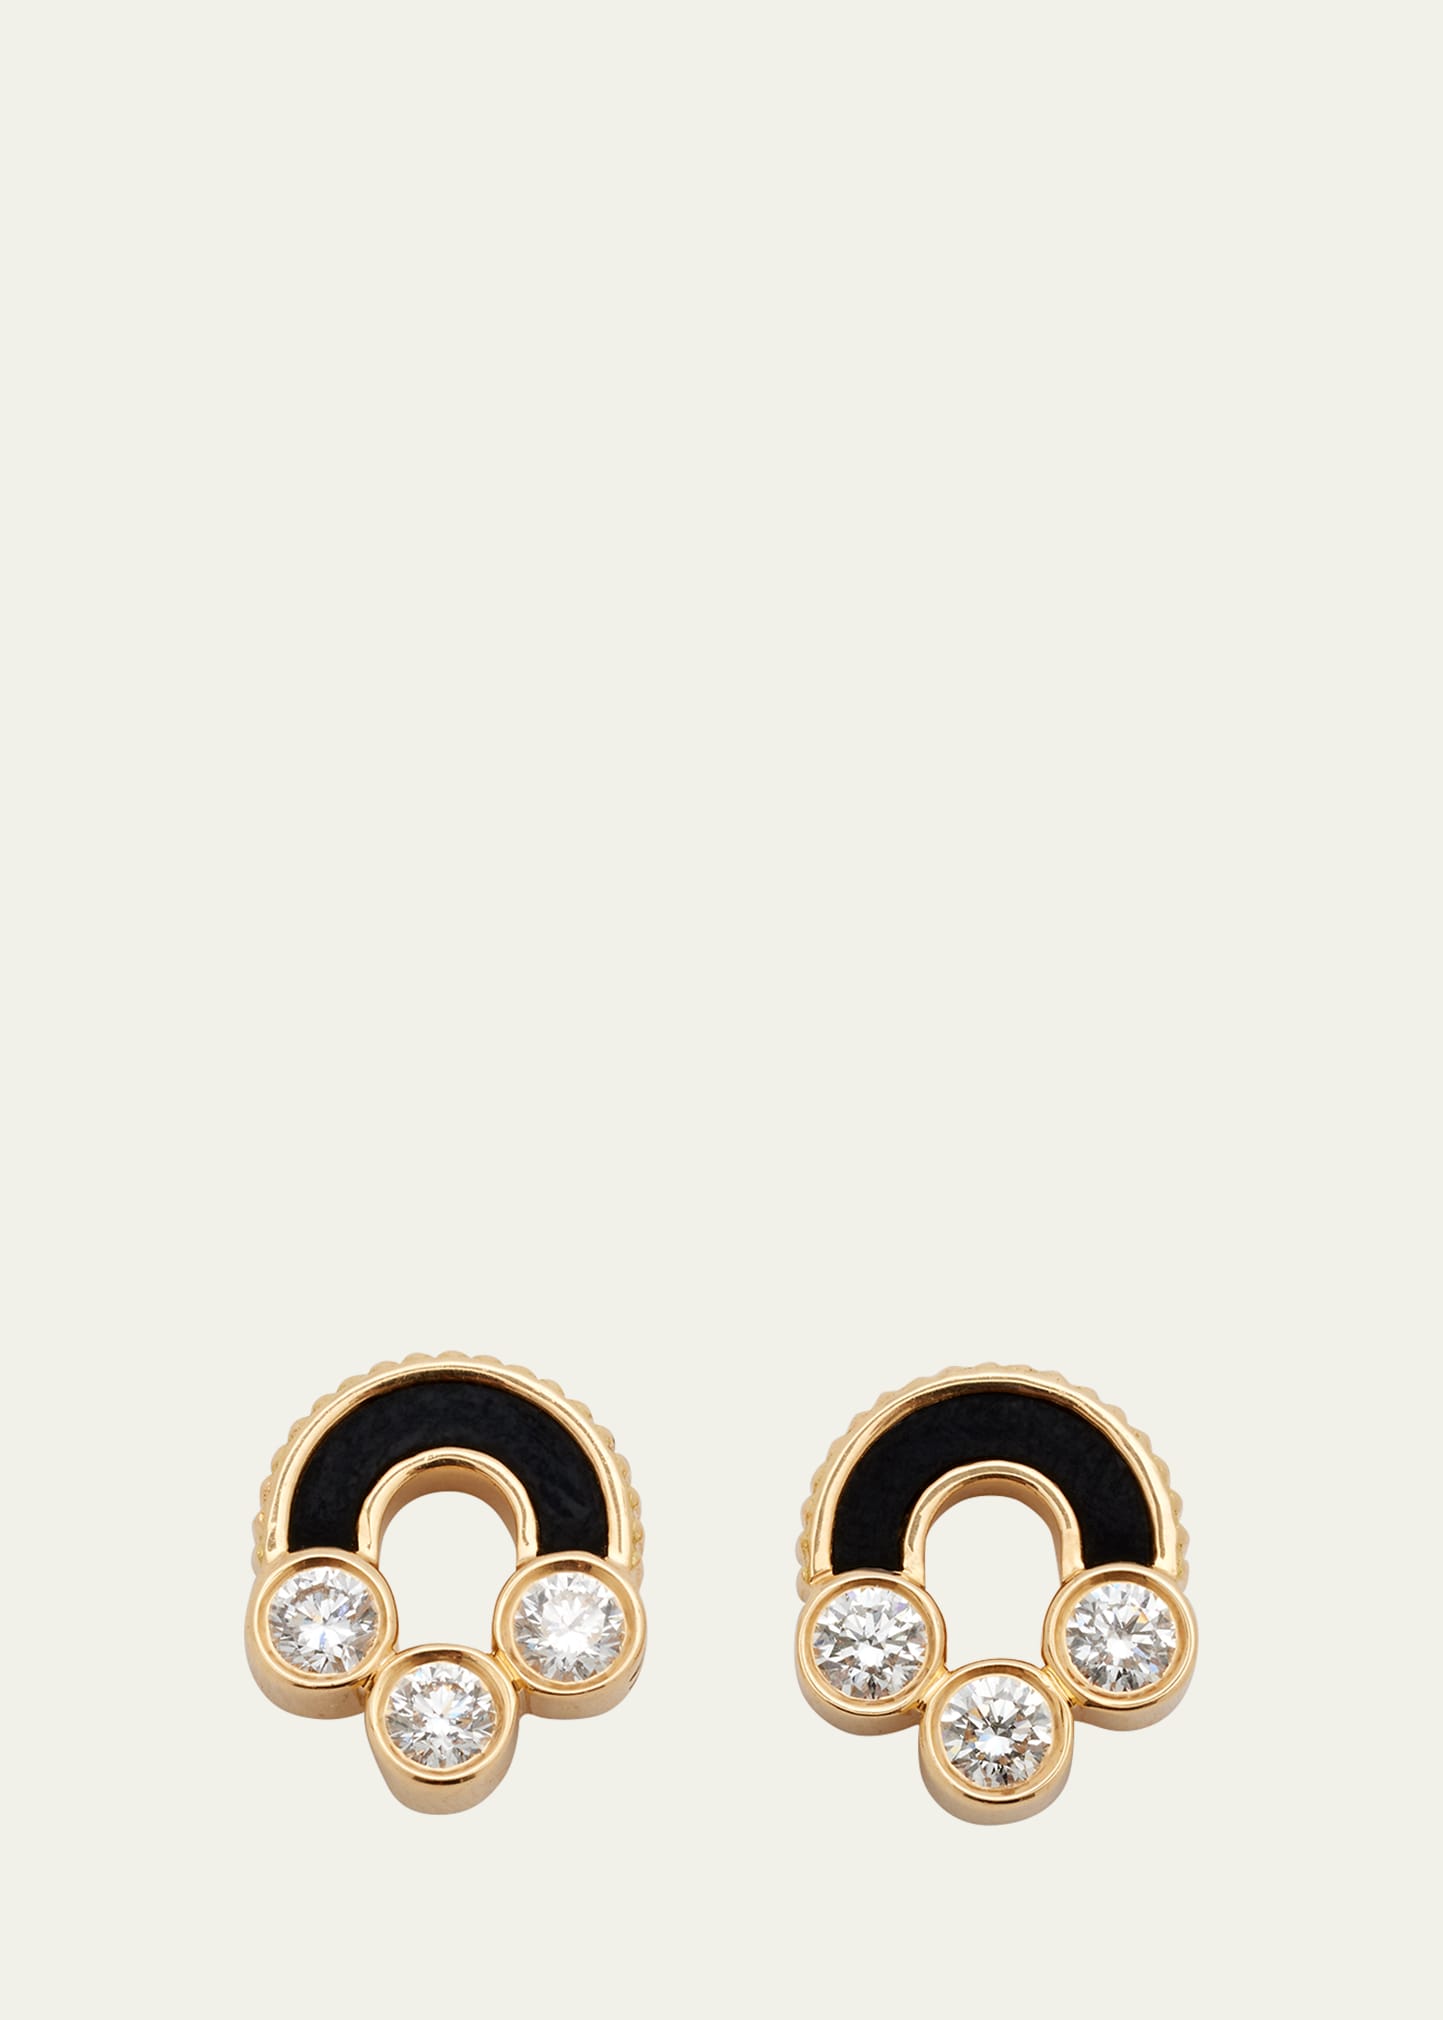 Magnetic Stud Earrings in Onyx, 18K Yellow Gold and Diamonds